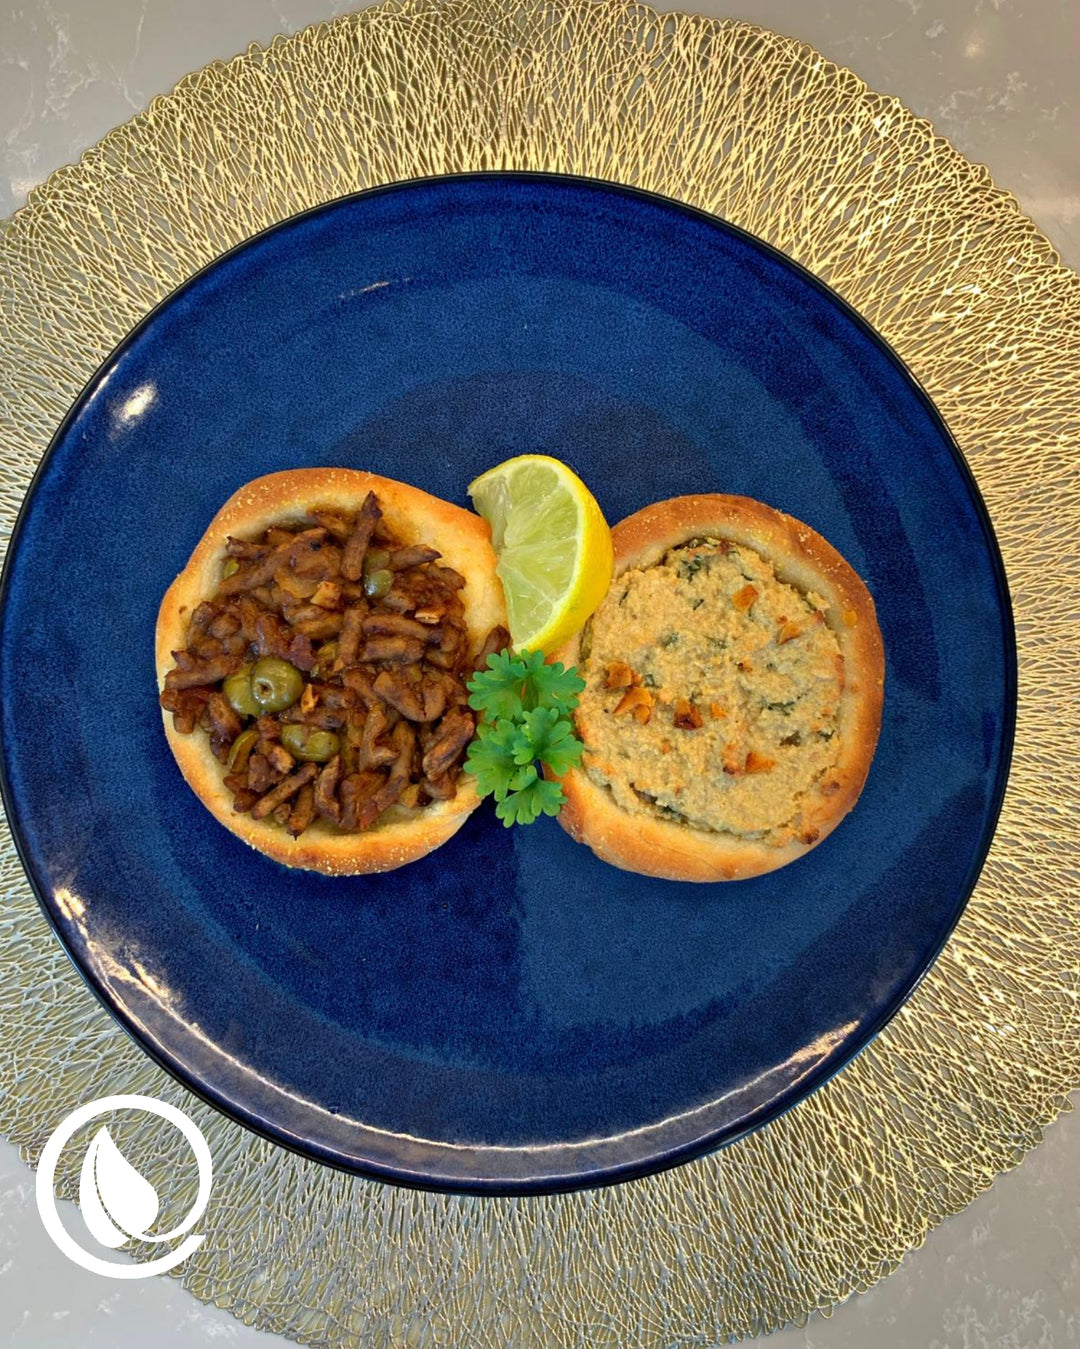 Sfiha with Vegan Mince Sauce and Cashew Cheese